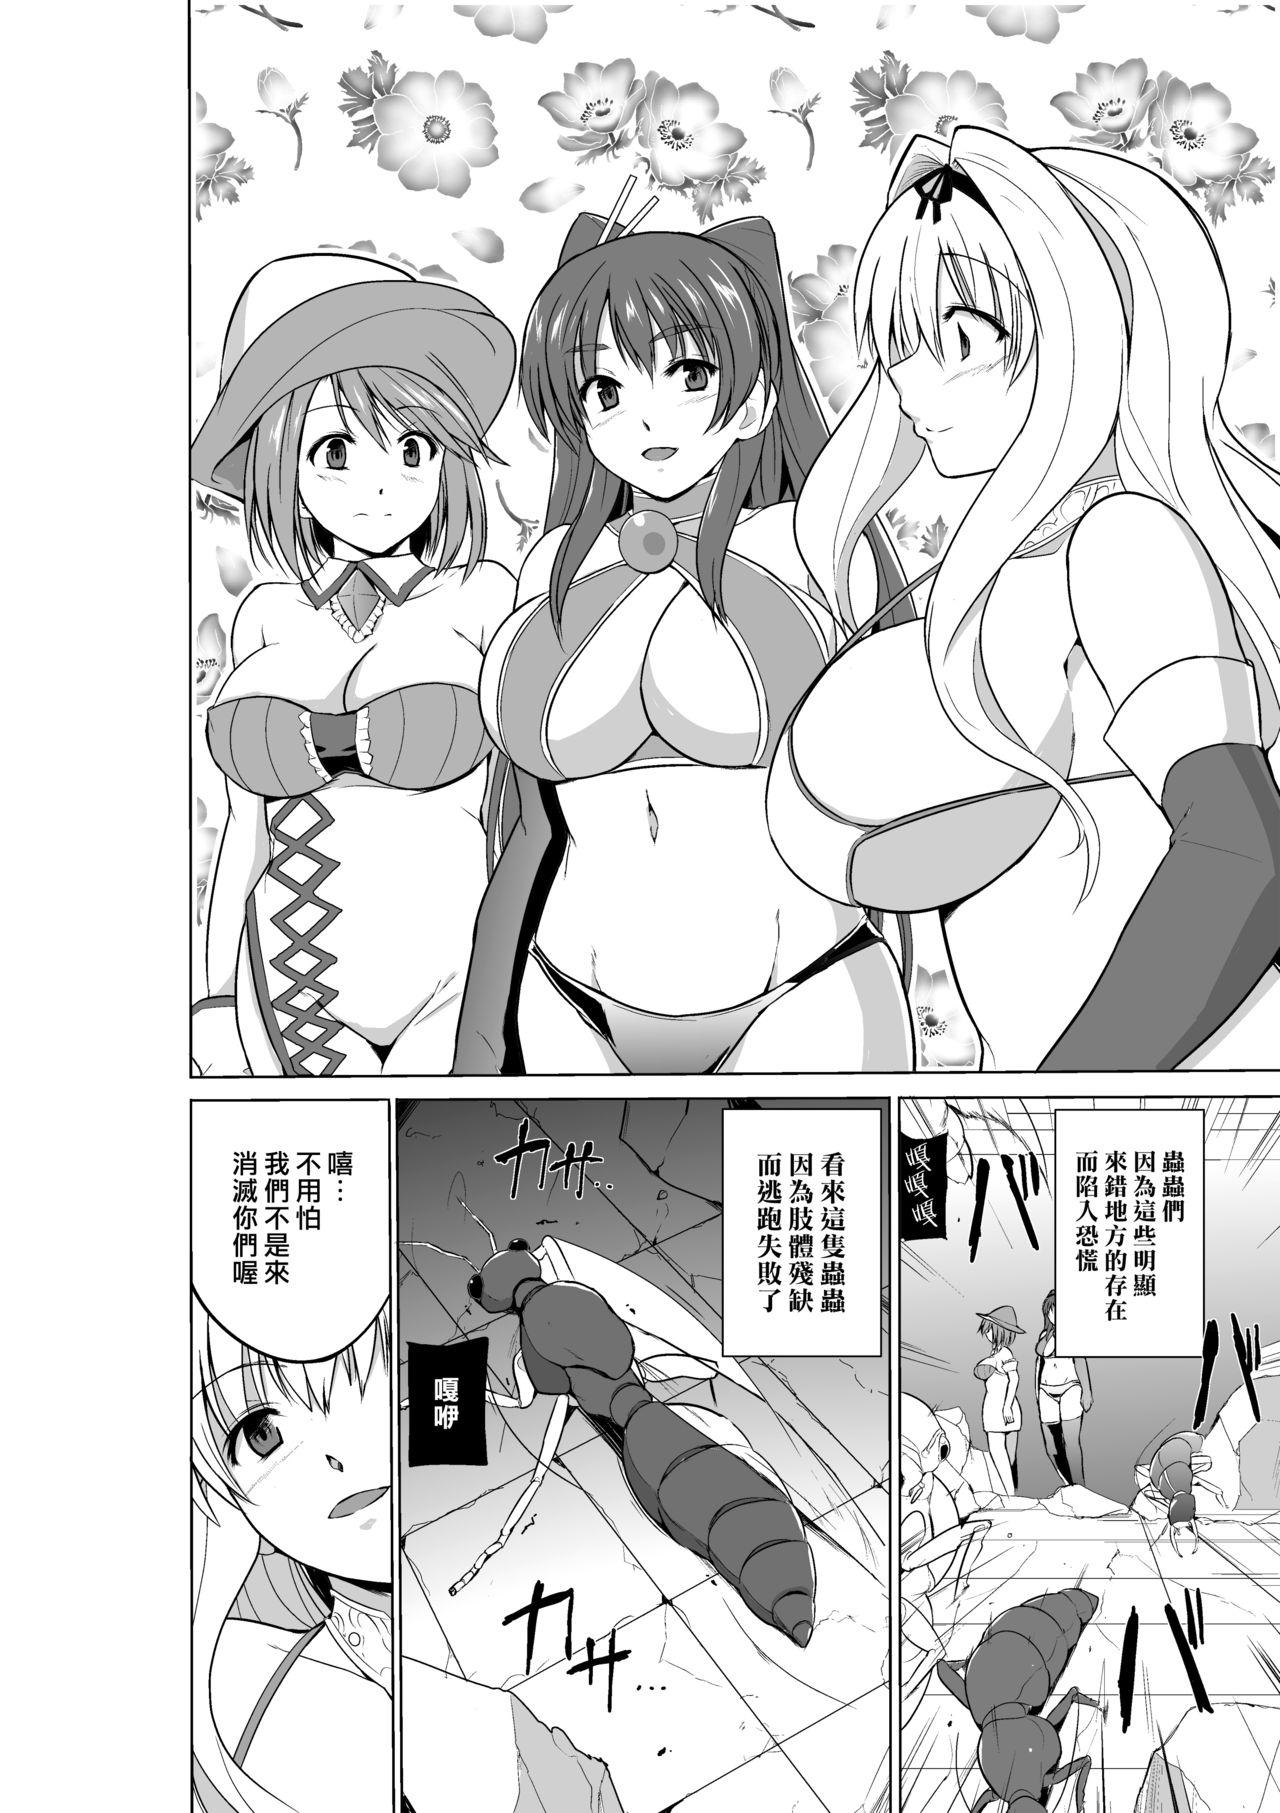 Teamskeet Dungeon Travelers Minna no Oyuugi - Toheart2 Young Men - Page 2